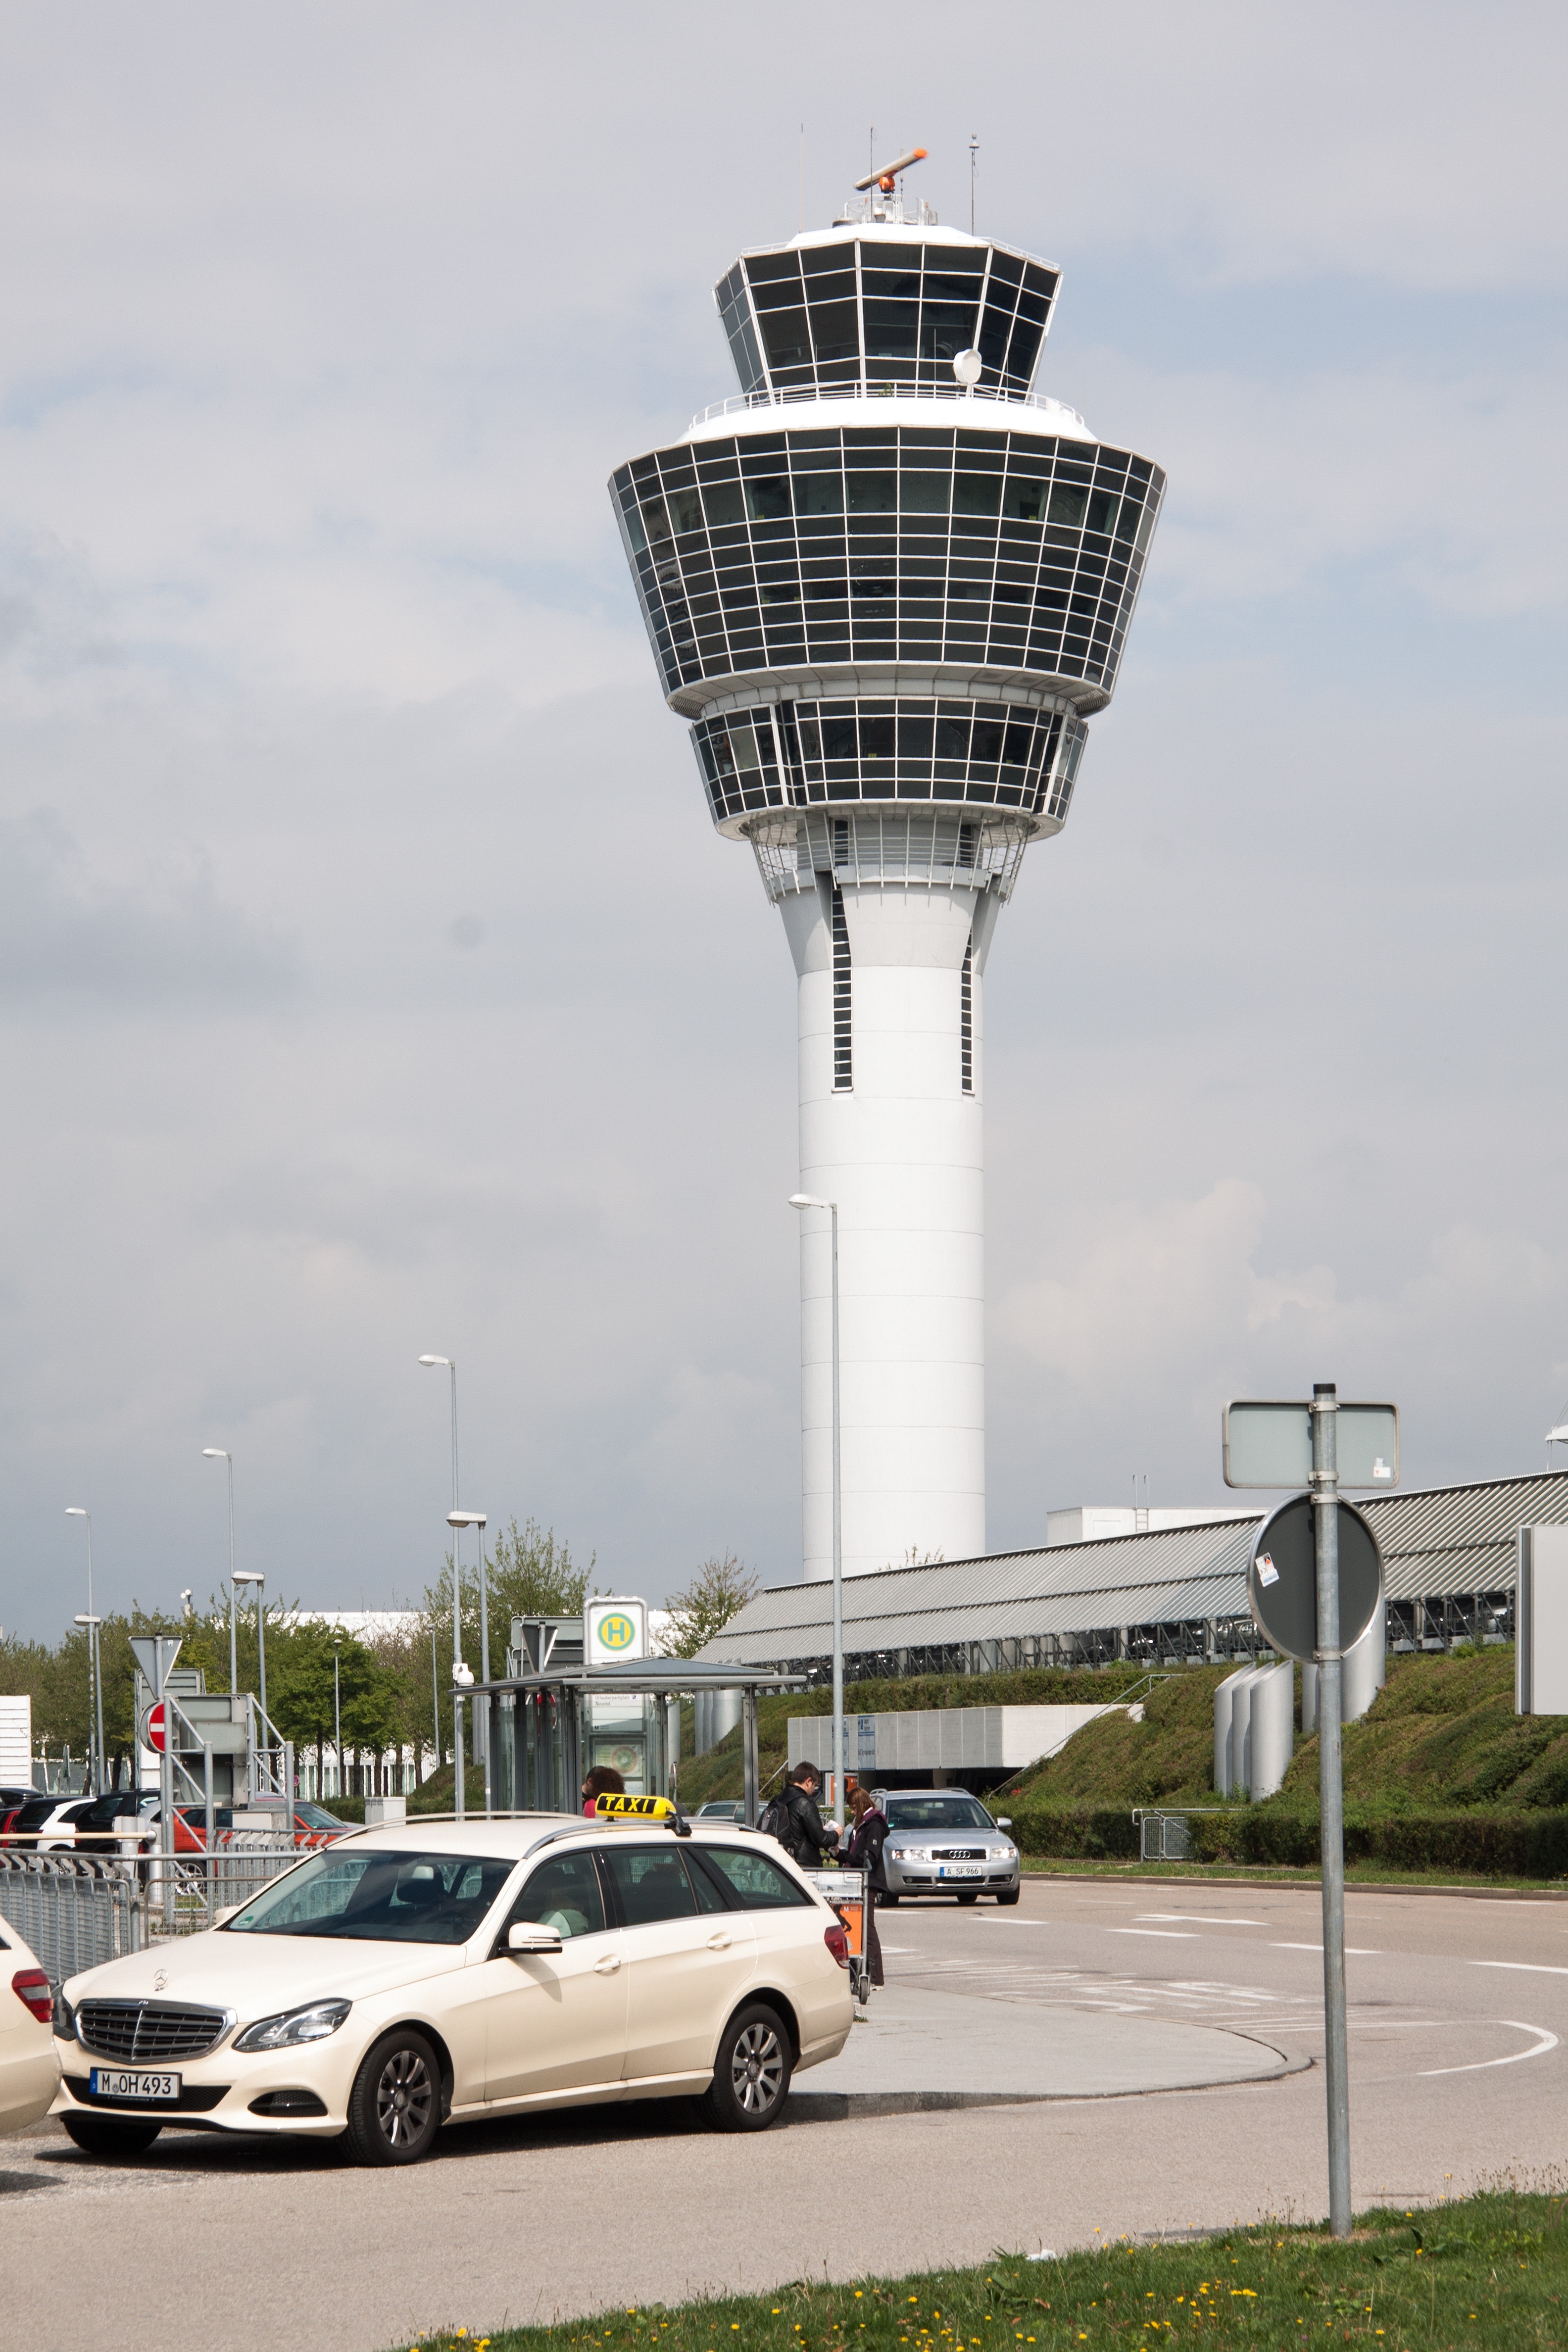 low angle photograph of airport tower base